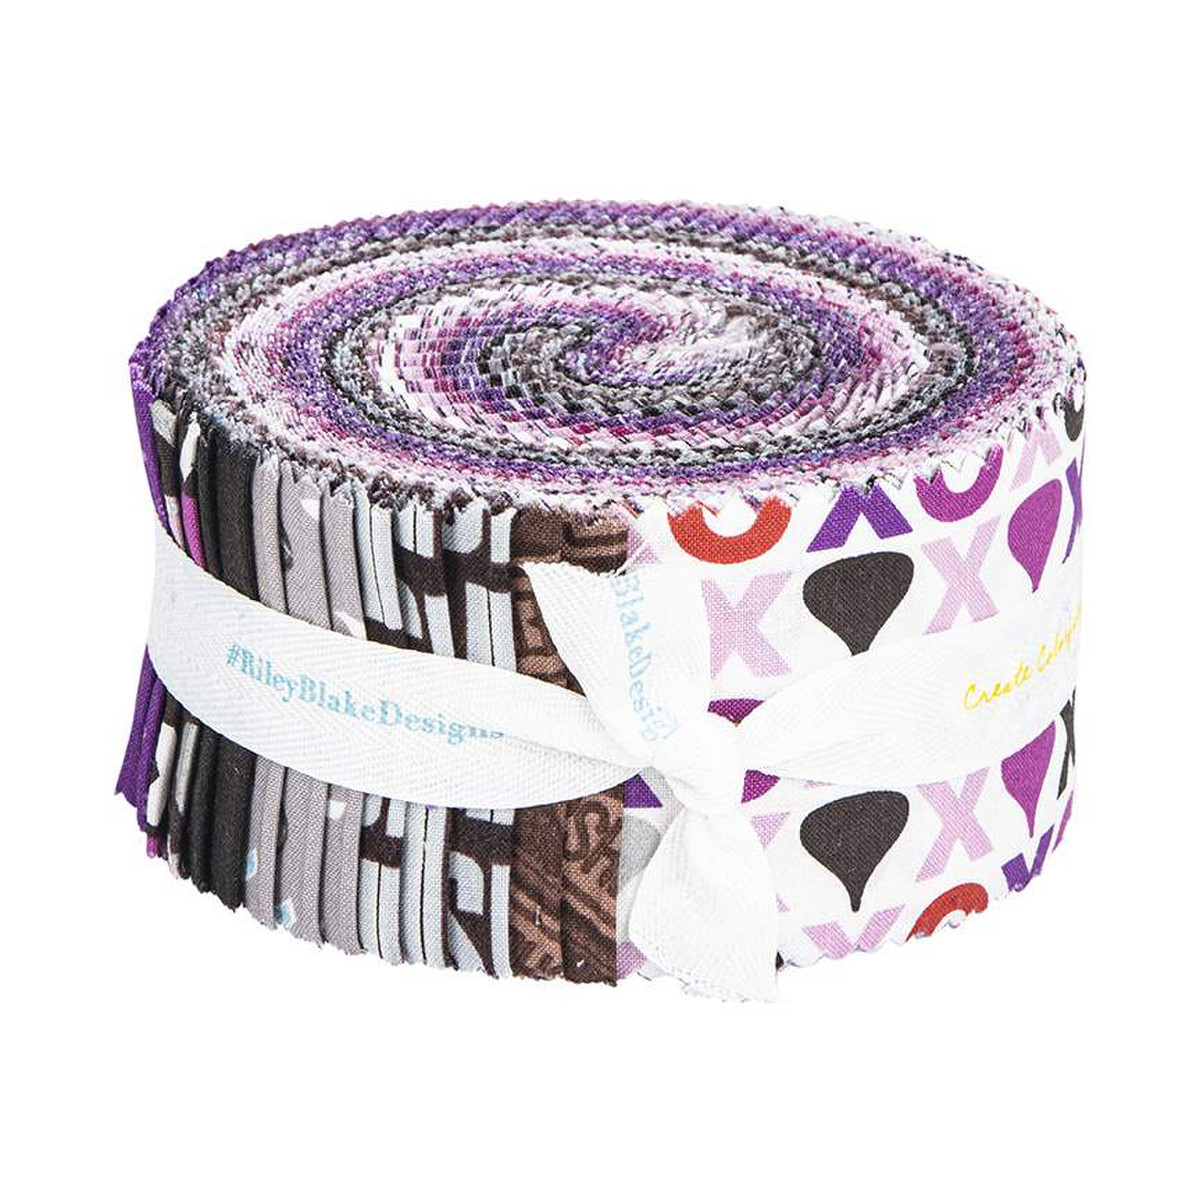 JELLY ROLL - Celebrate with Hershey Valentine's by RBD Designers for Riley Blake